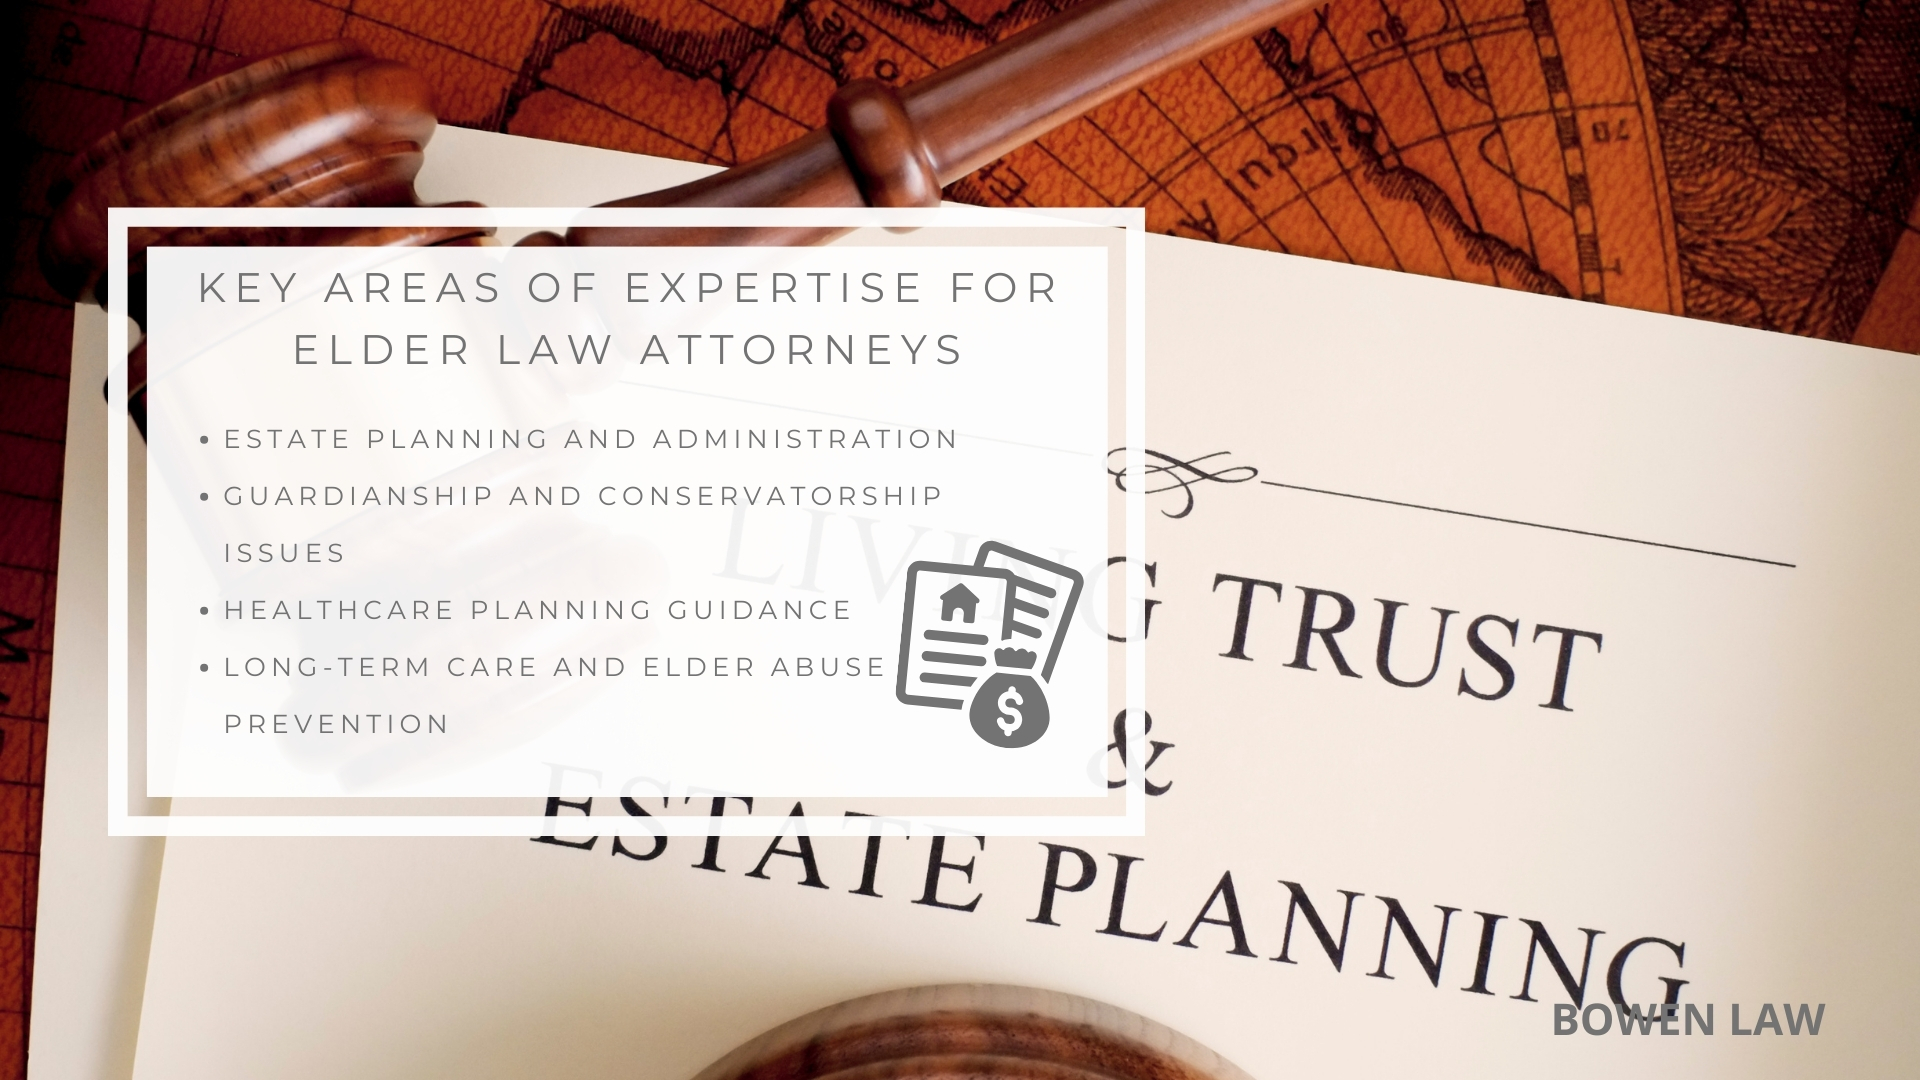 Infographic image of key areas of expertise for elder law attorneys